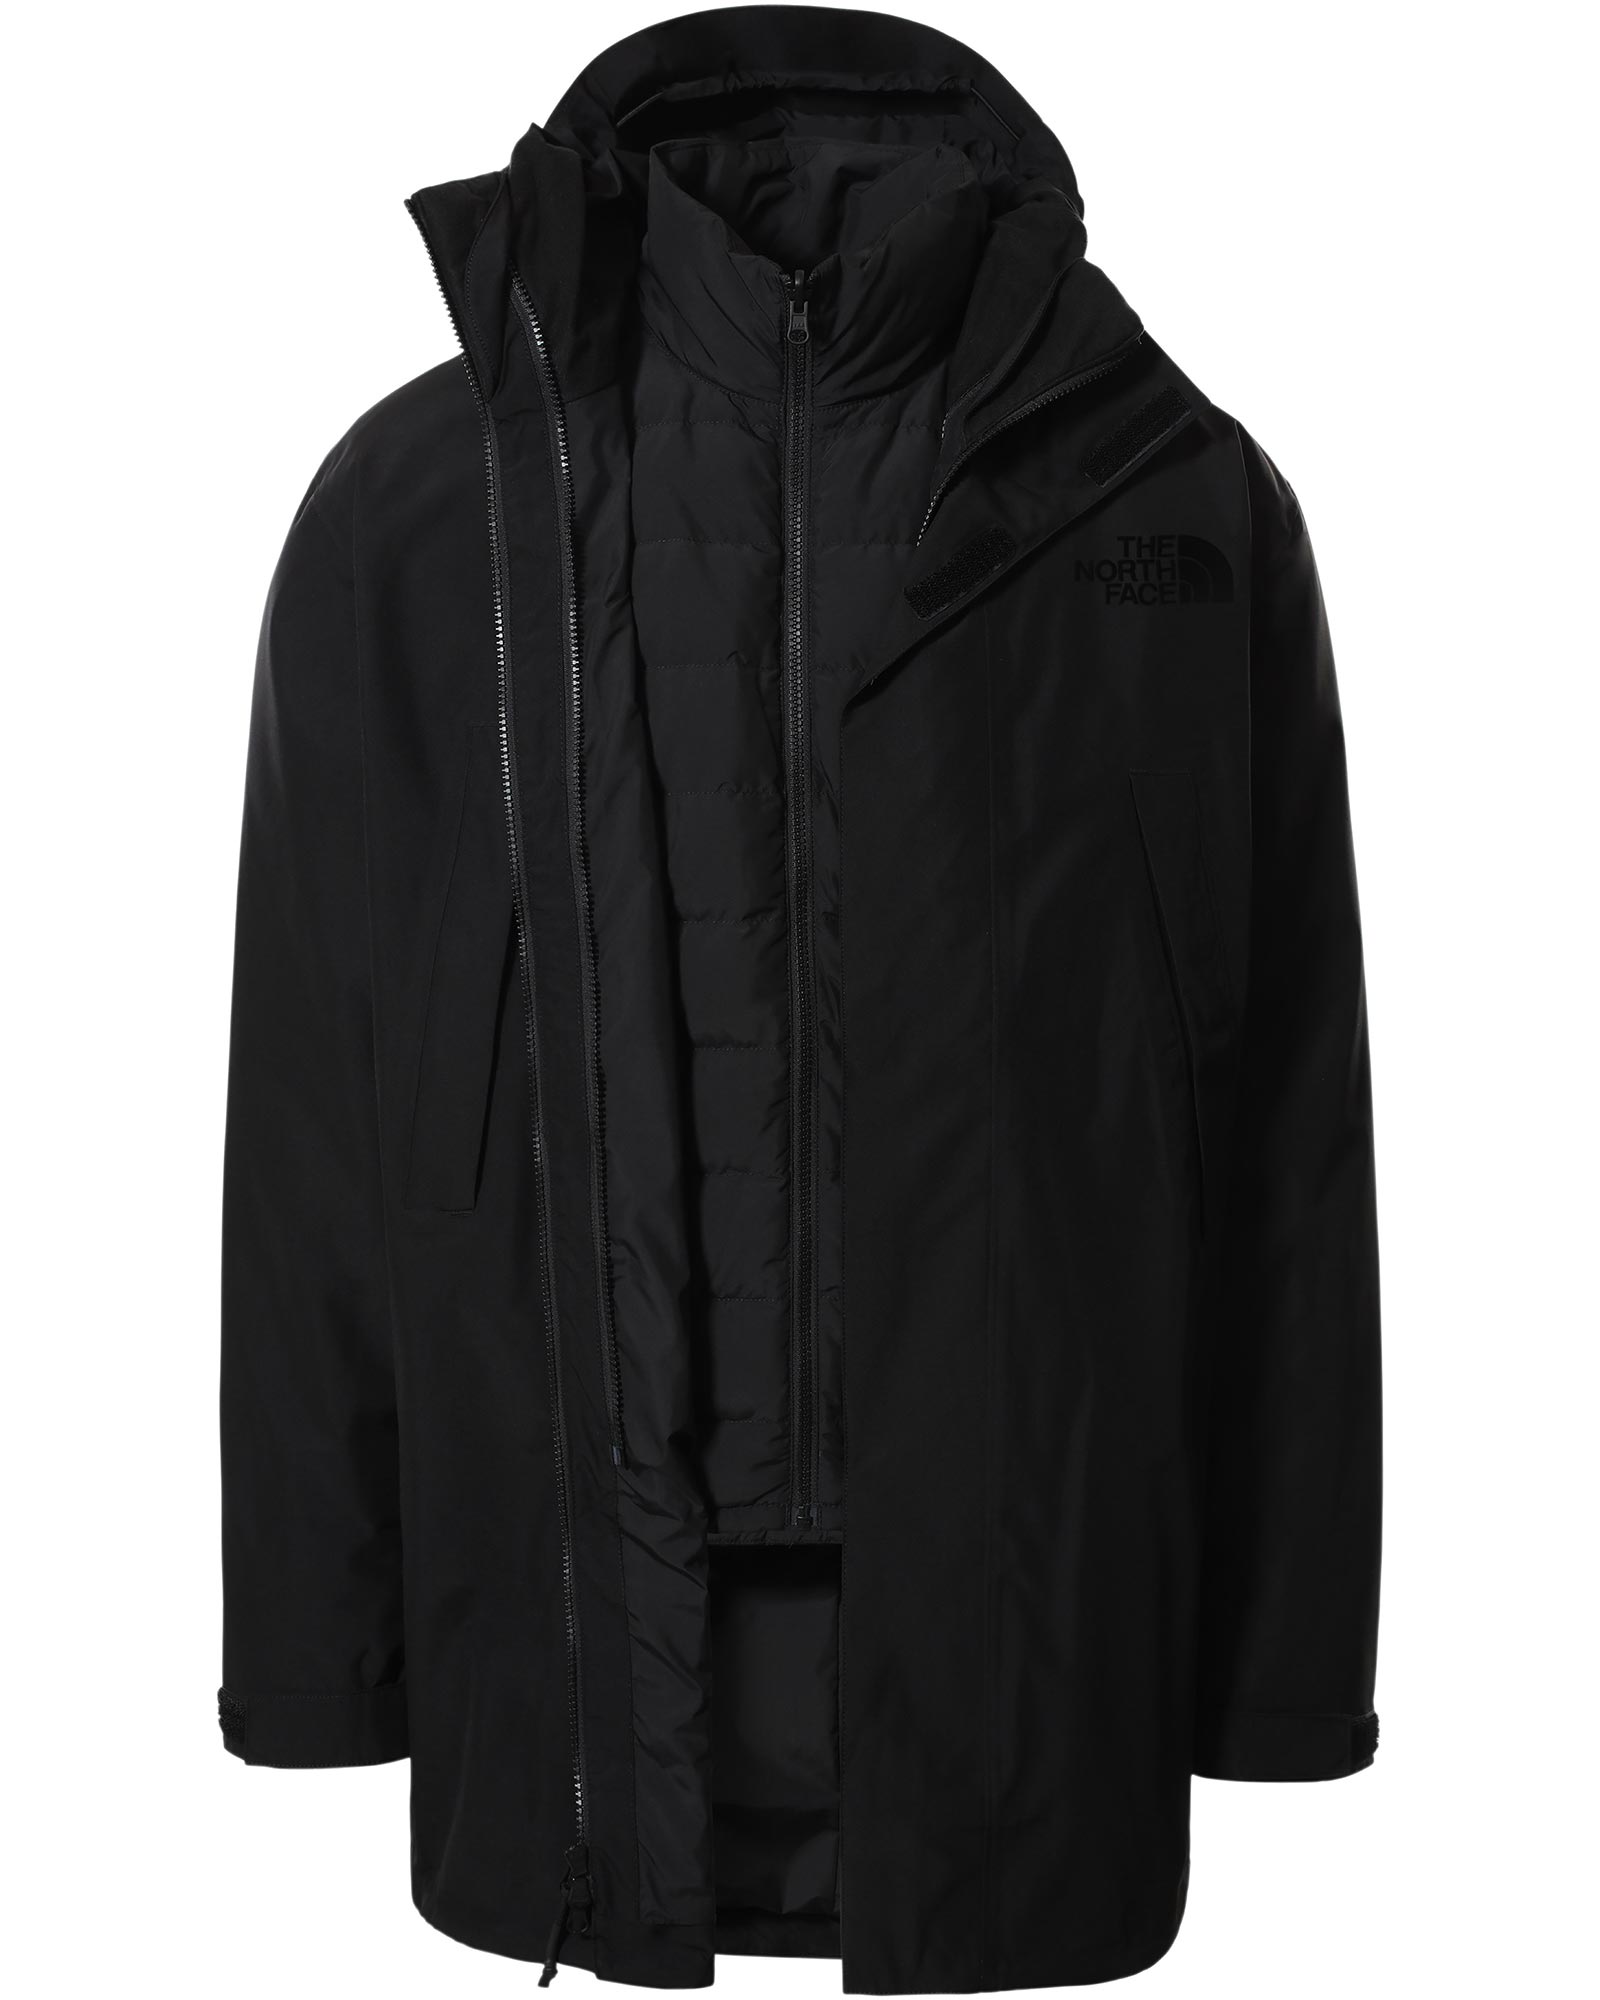 The North Face Arctic Men’s Triclimate Parka Jacket - TNF Black XS